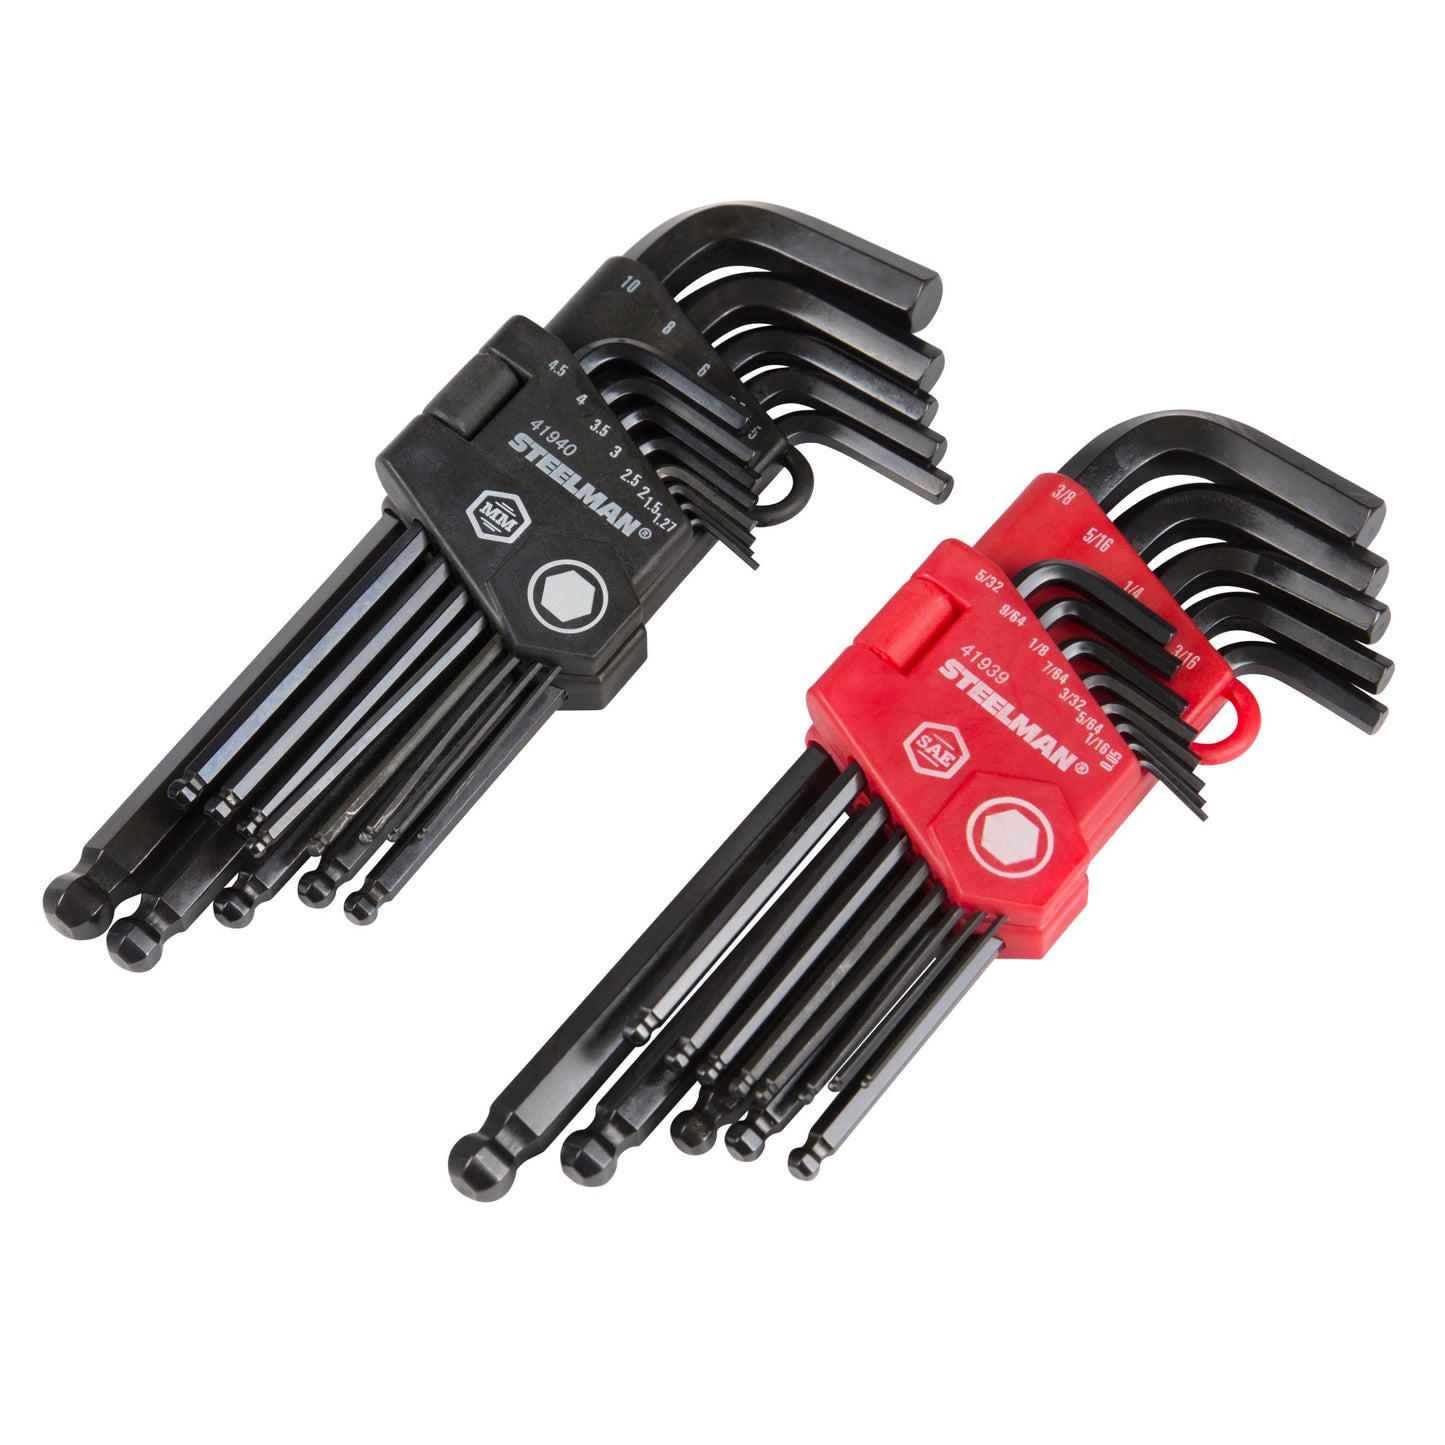 26-Piece Long Arm Ball End Hex Key Wrench Set, Inch/Metric (SAE/MM)